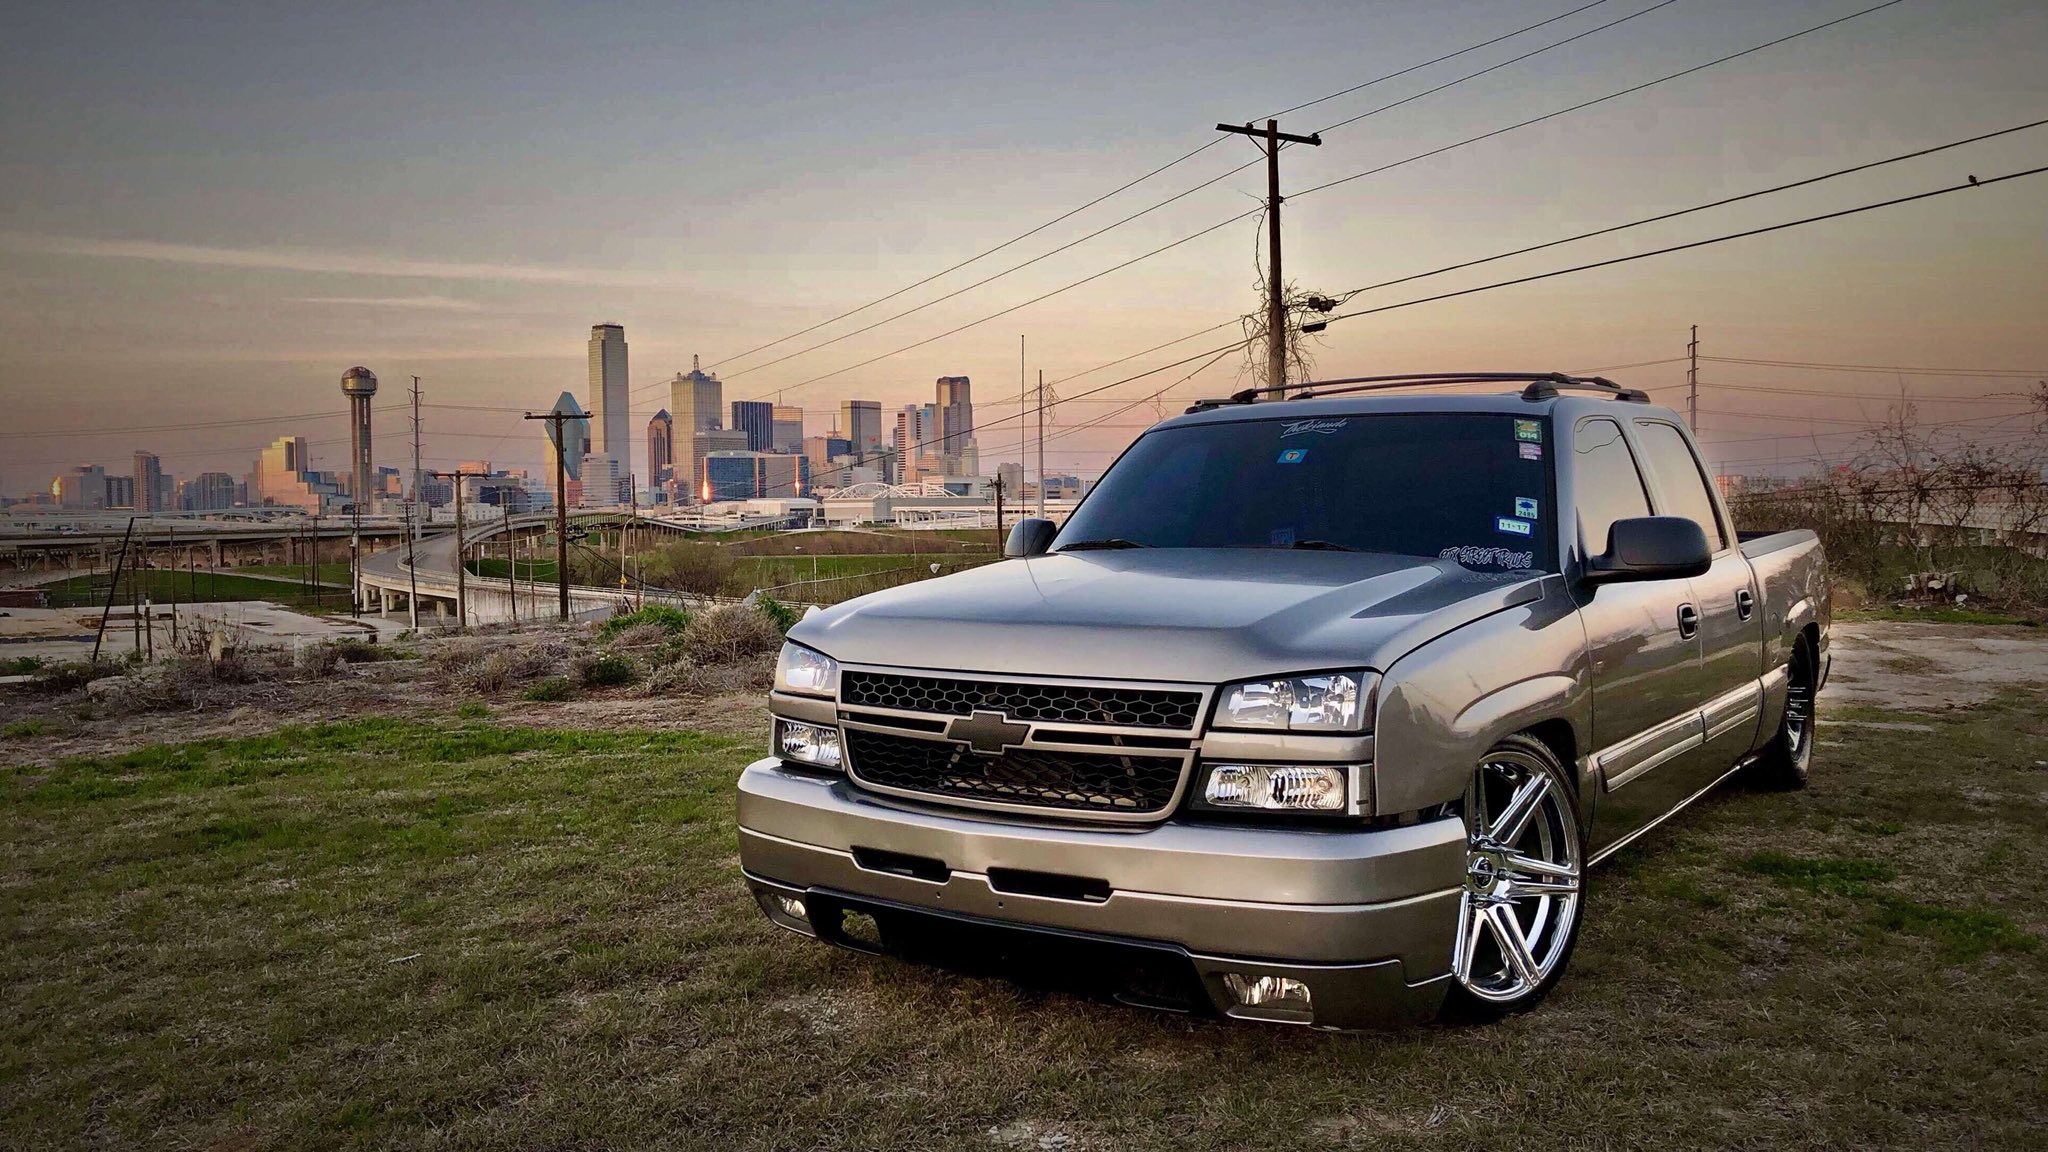 isaiah on Twitter Dropped trucks are ugly  mybuild mytruck Dallas  Texas suelo trokiando httpstcoWORKNI6gnI  X